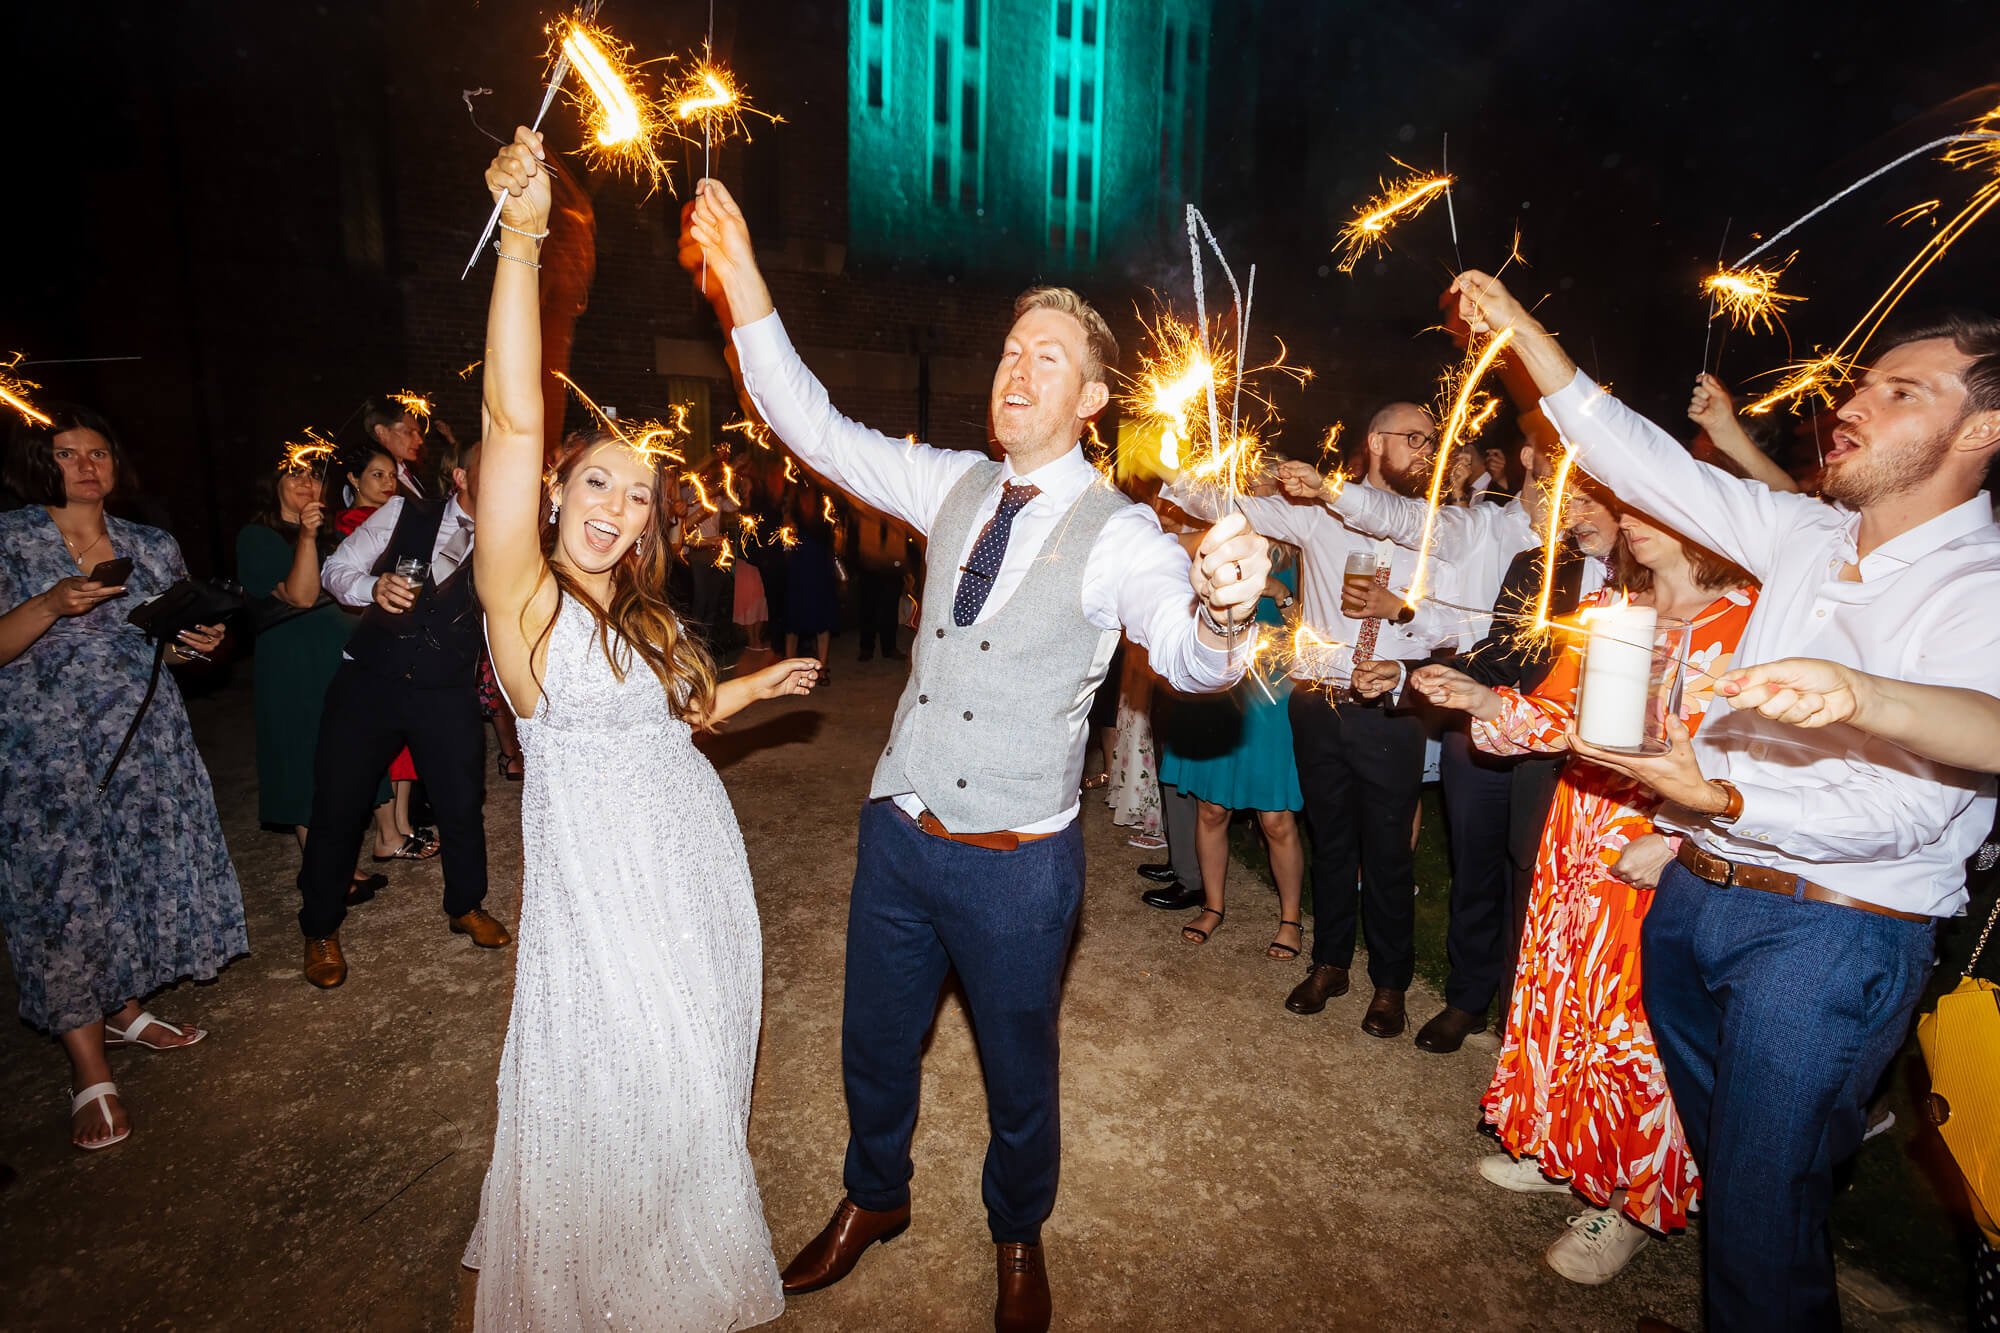 Celebrating a wedding with sparklers